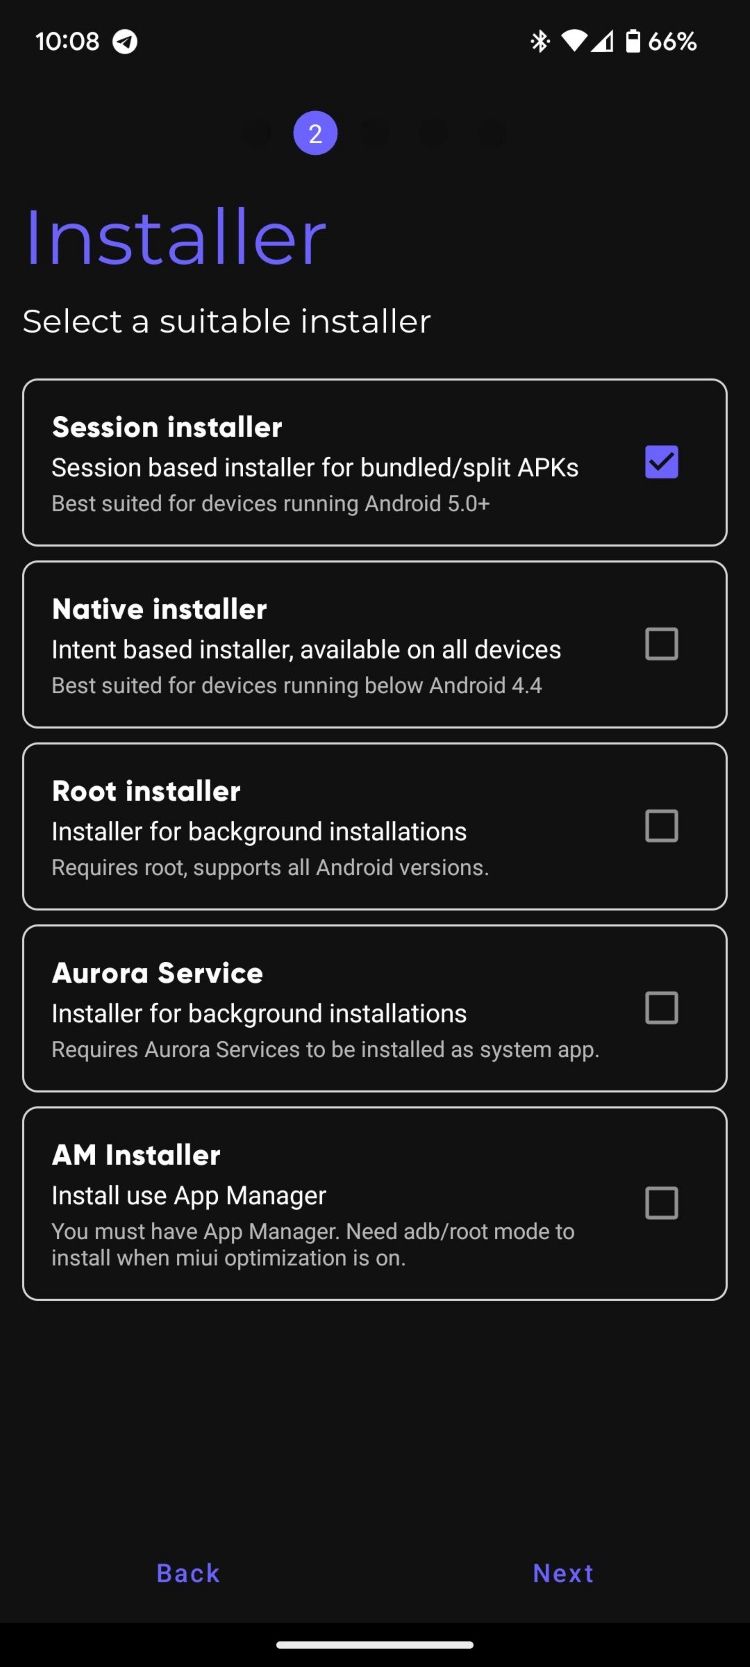 The Installer page in the Aurora Store app with the Session installer selected